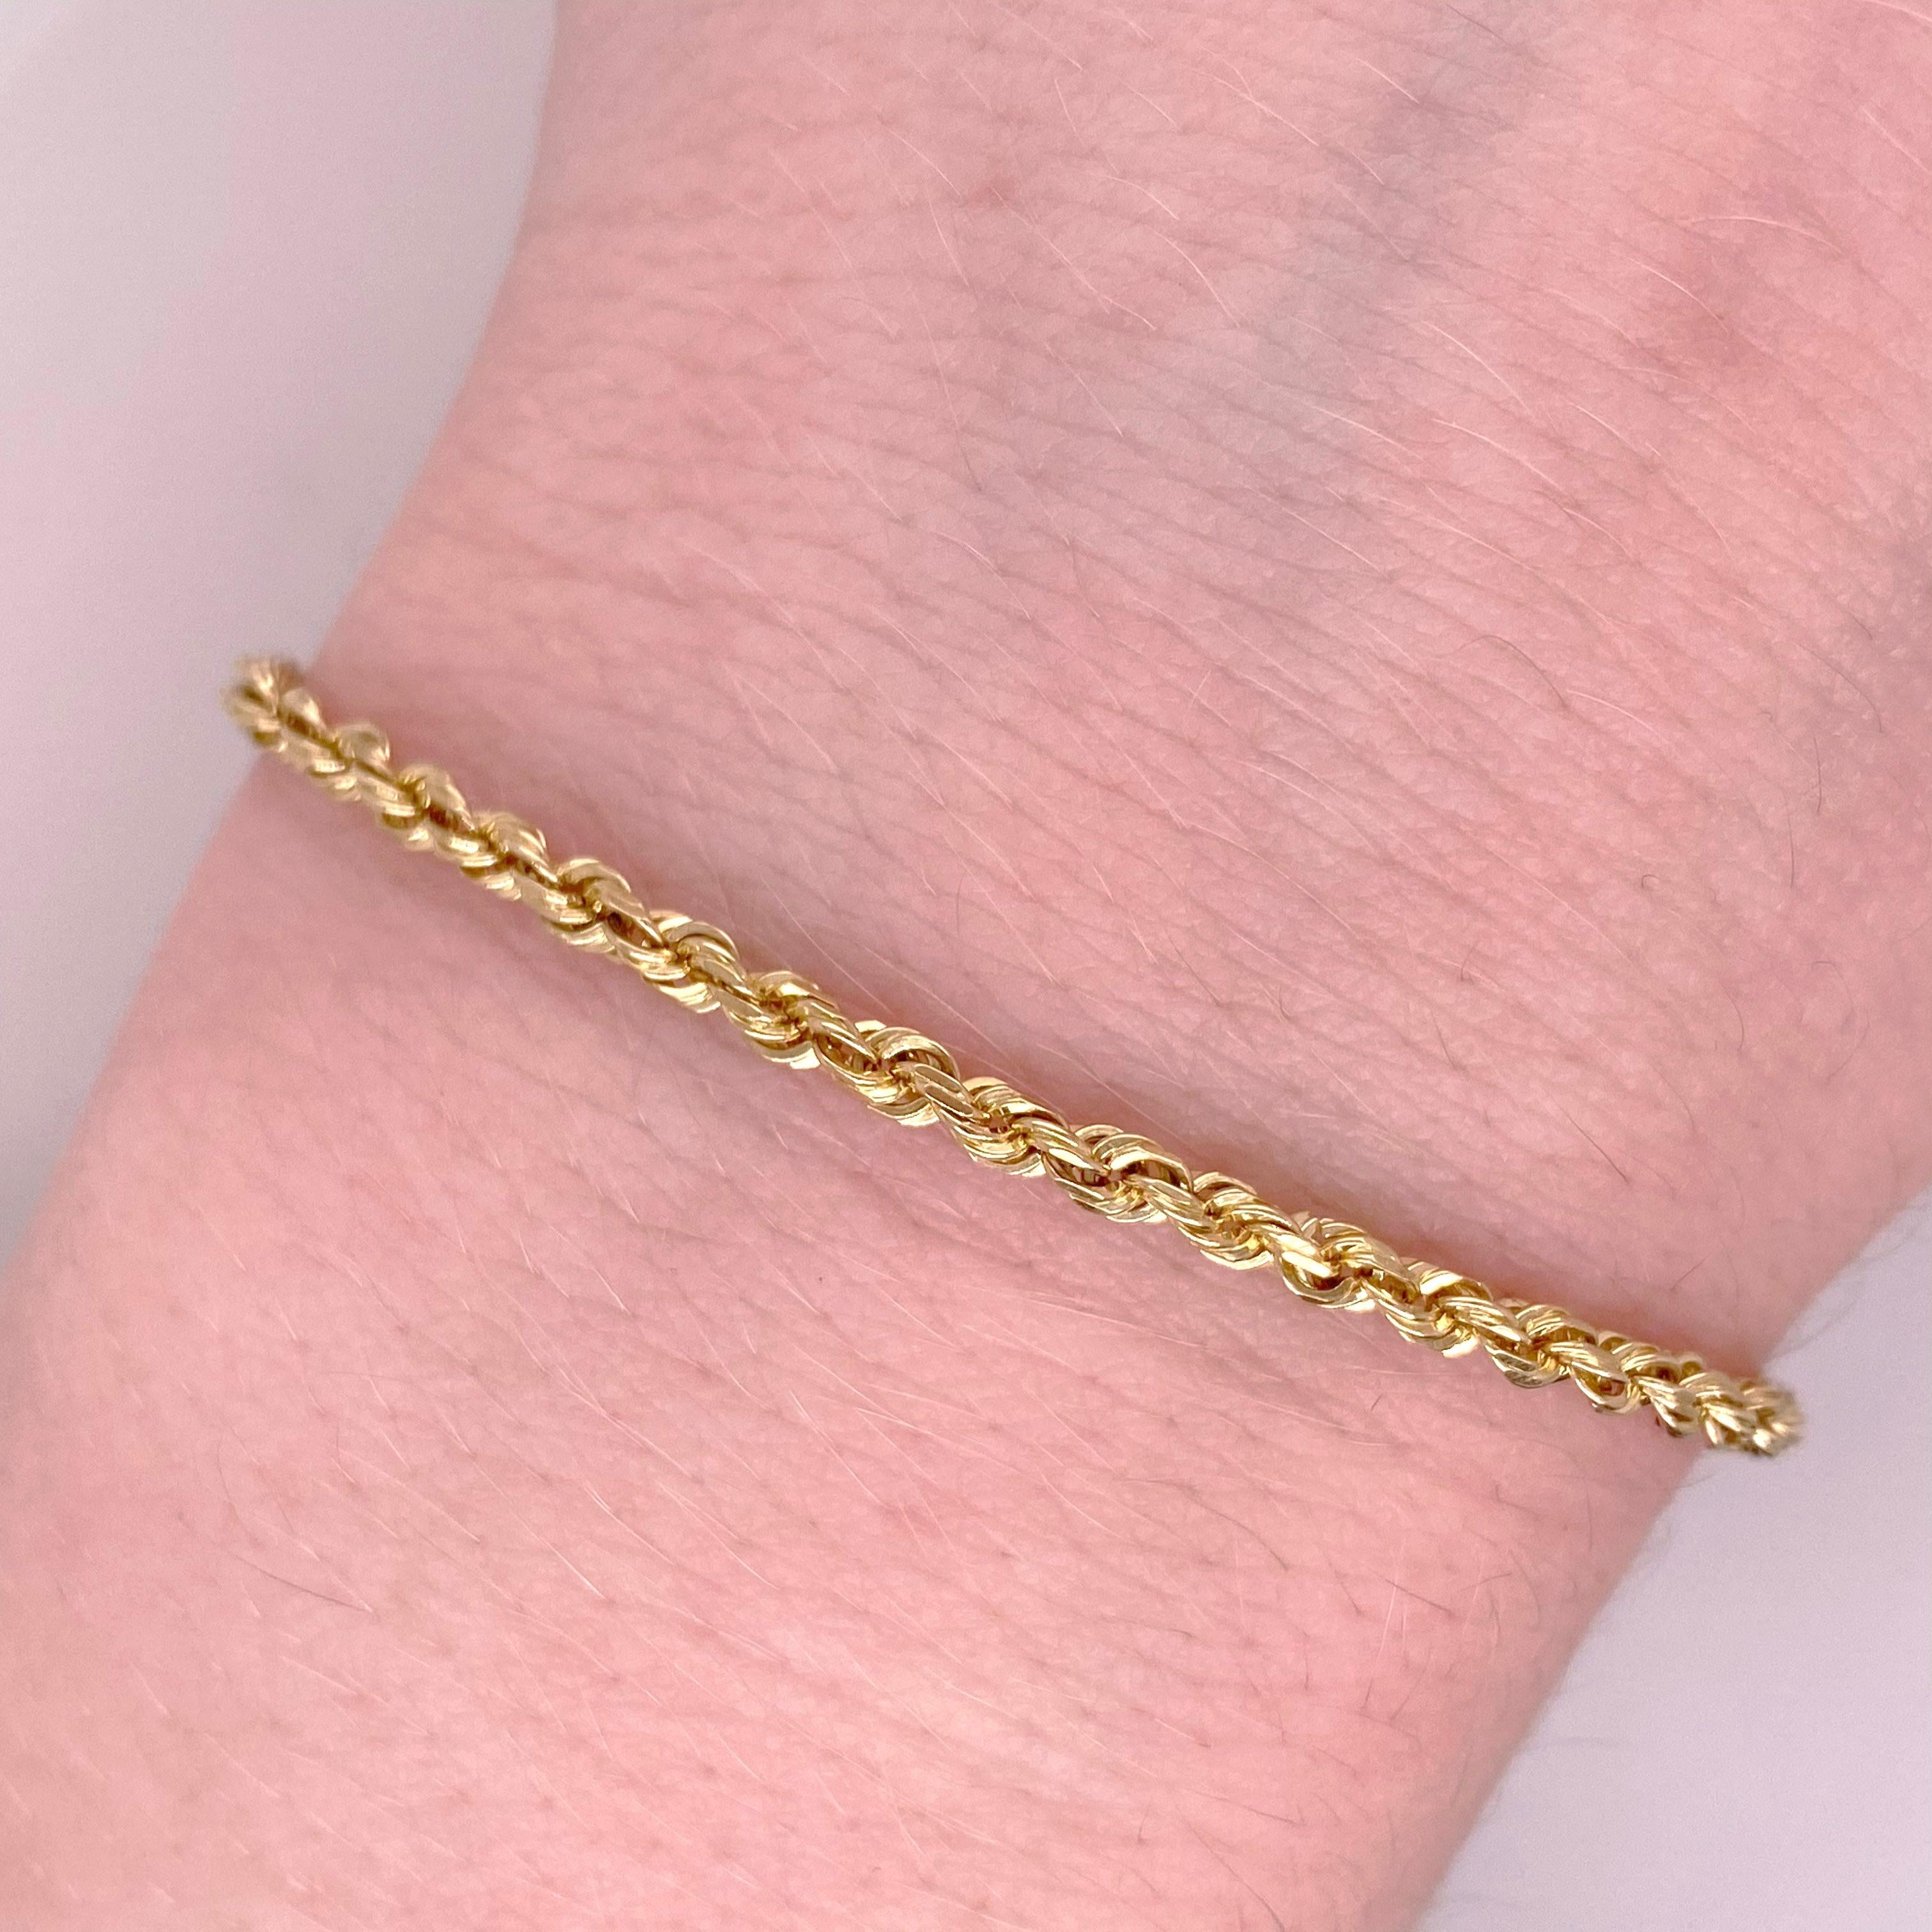 This rope bracelet is a nice size at 3 millimeters wide and is a nice length that will fit most wrists.  If you need a shorter length, your local jeweler could custom size the bracelet.  The details for this gorgeous bracelet are listed below:
Chain